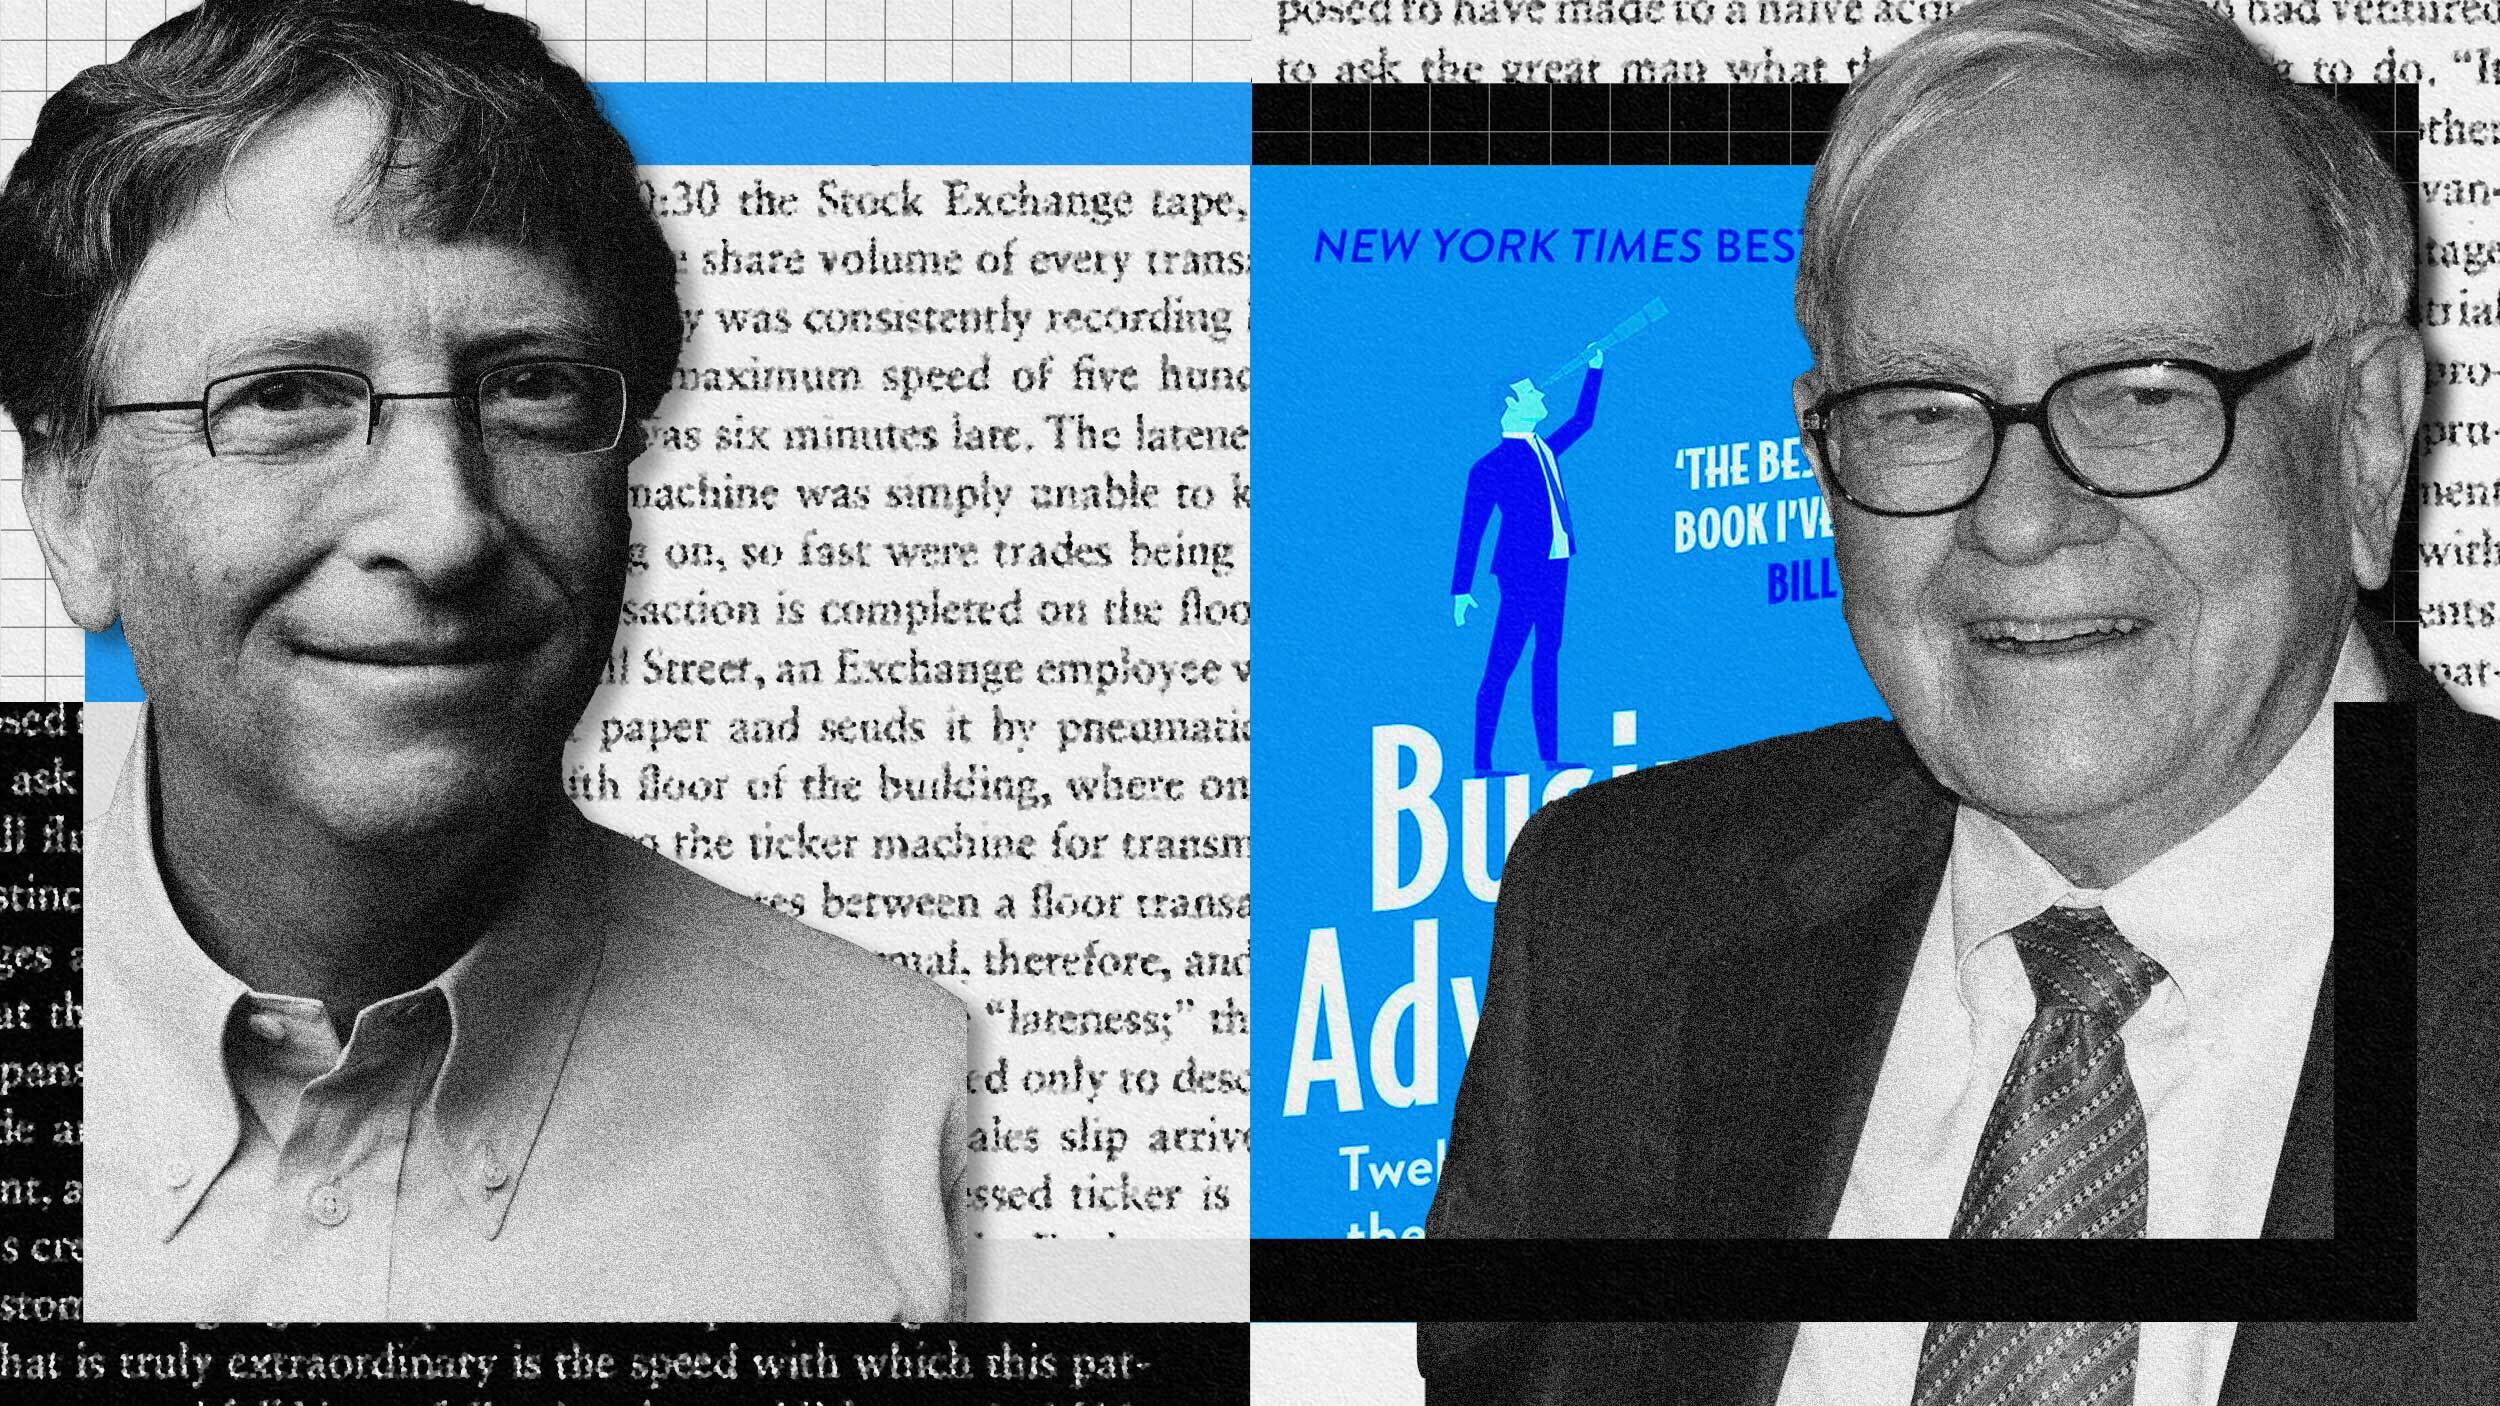 Two elderly men in glasses smiling. One man wears a white shirt and the other a suit and tie. The background features a blue book cover titled "Business Adventures," symbolizing their connection through timeless business wisdom.